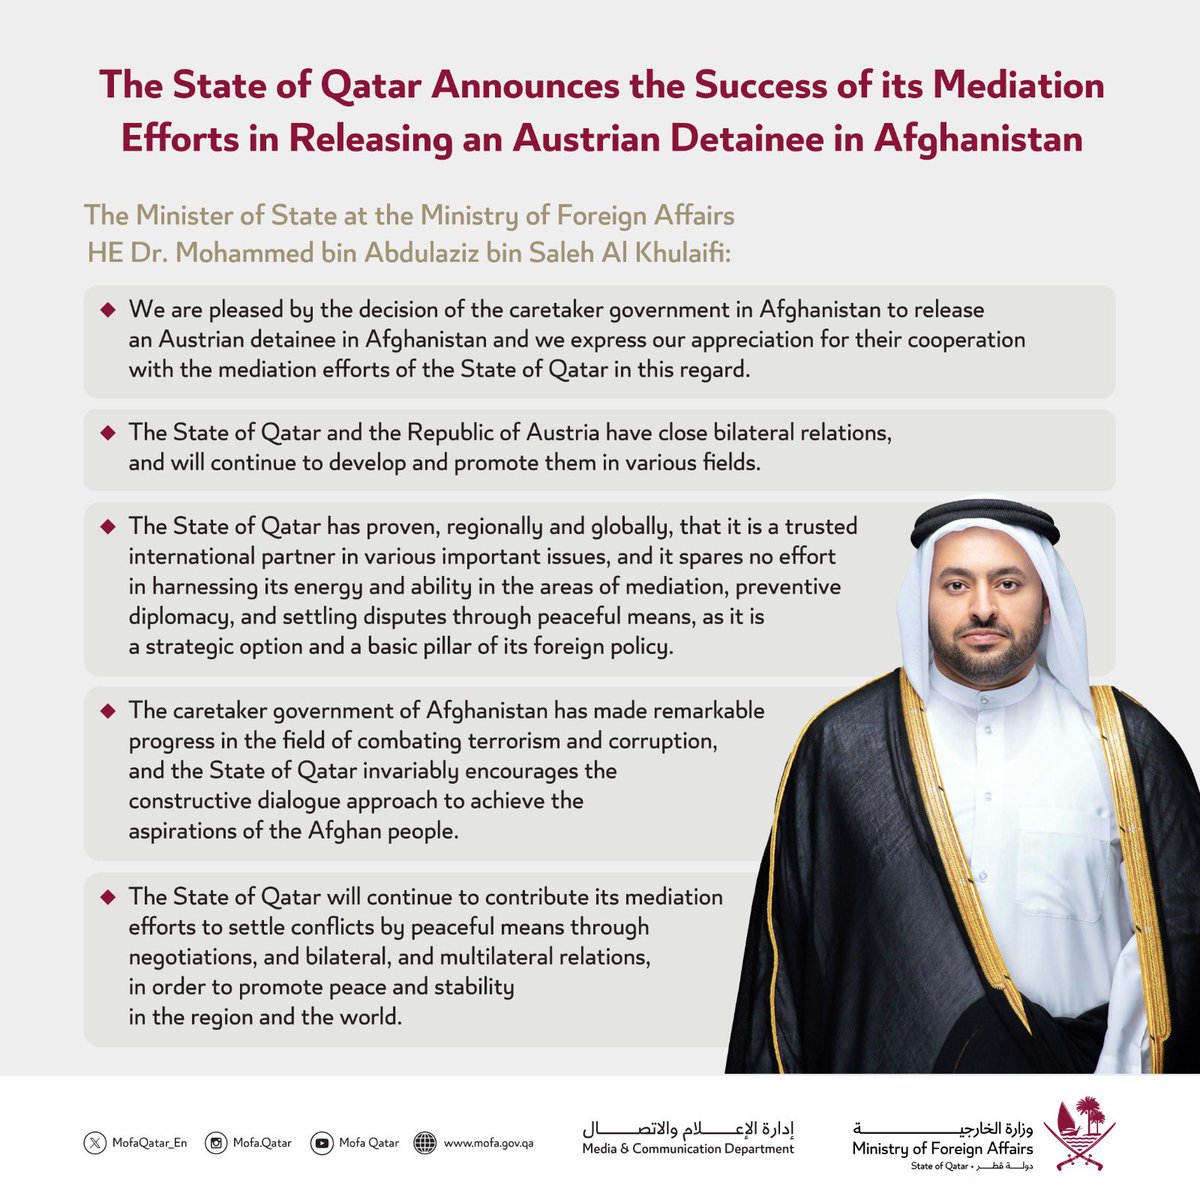 Infographic | The State of Qatar Announces the Success of its Mediation Efforts in Releasing an Austrian Detainee in #Afghanistan #MOFAQatar